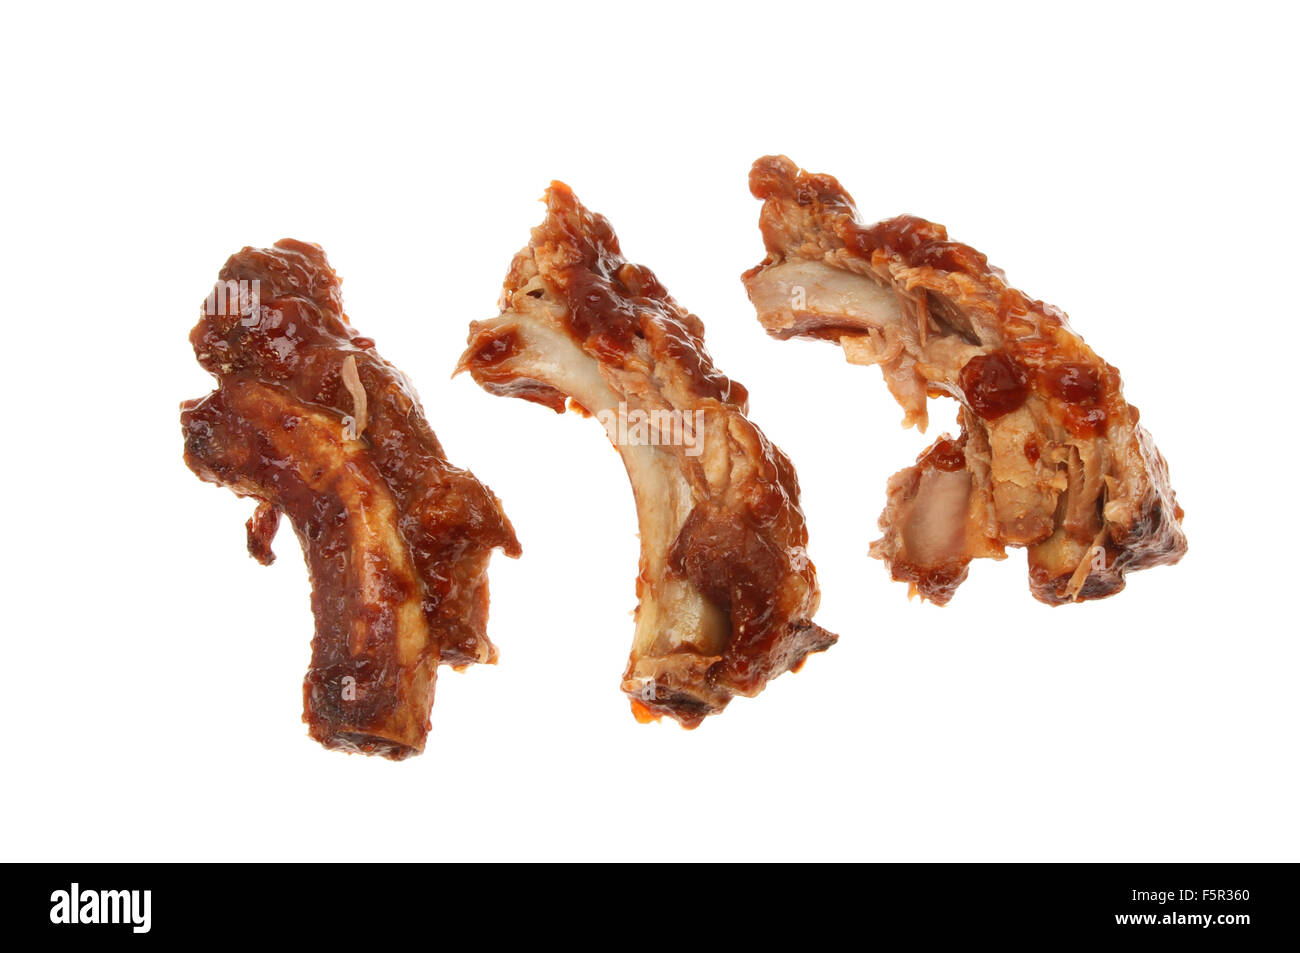 Pork spare ribs with barbecue sauce isolated against white Stock Photo